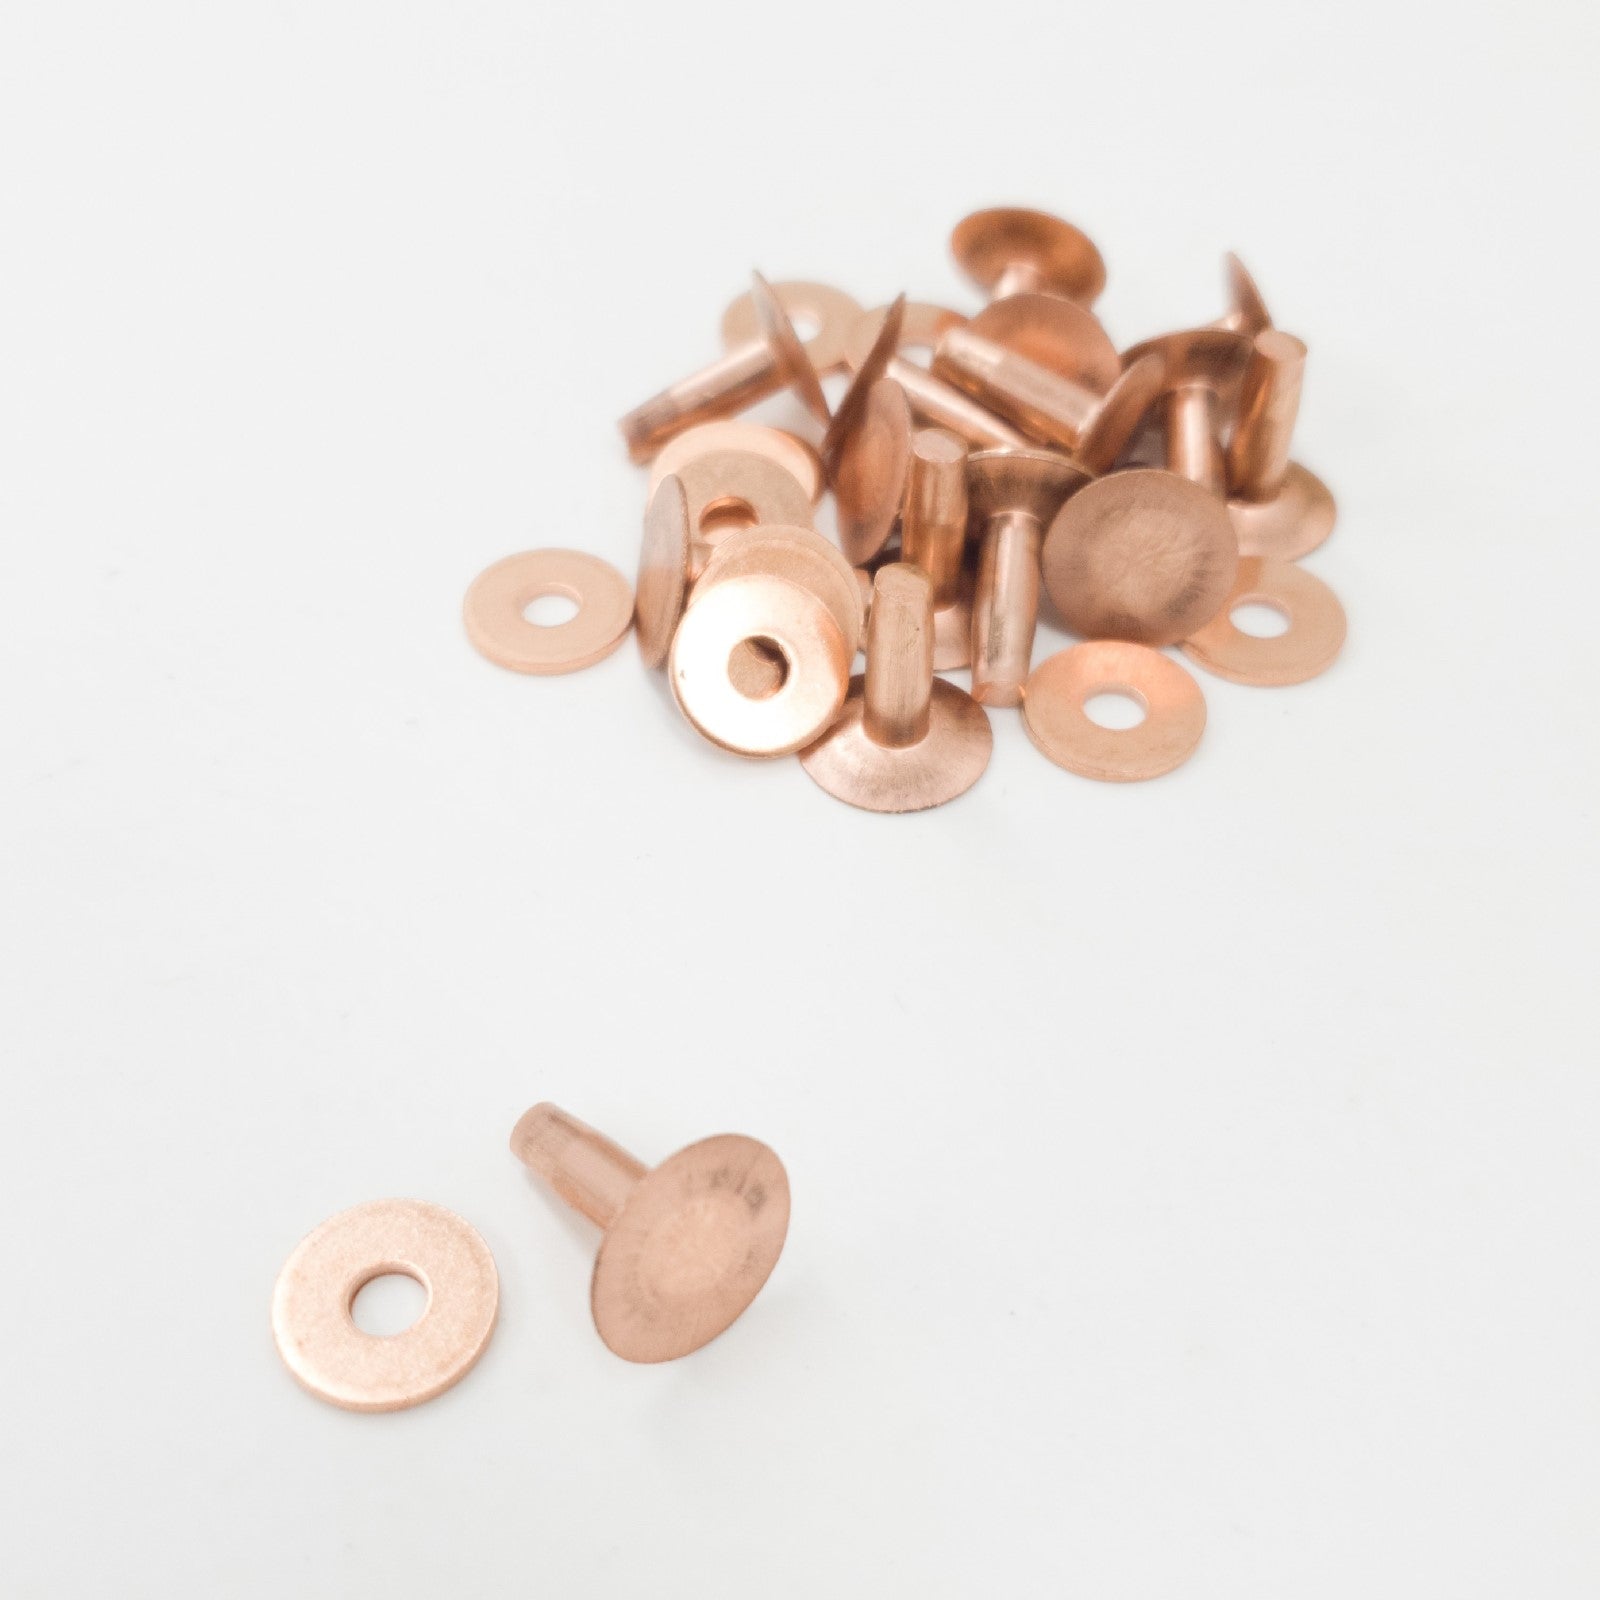 154pcs Copper Rivets For Leather, Leather Rivets, Pure Copper Rivets And  Burrs For Leather Work Jea